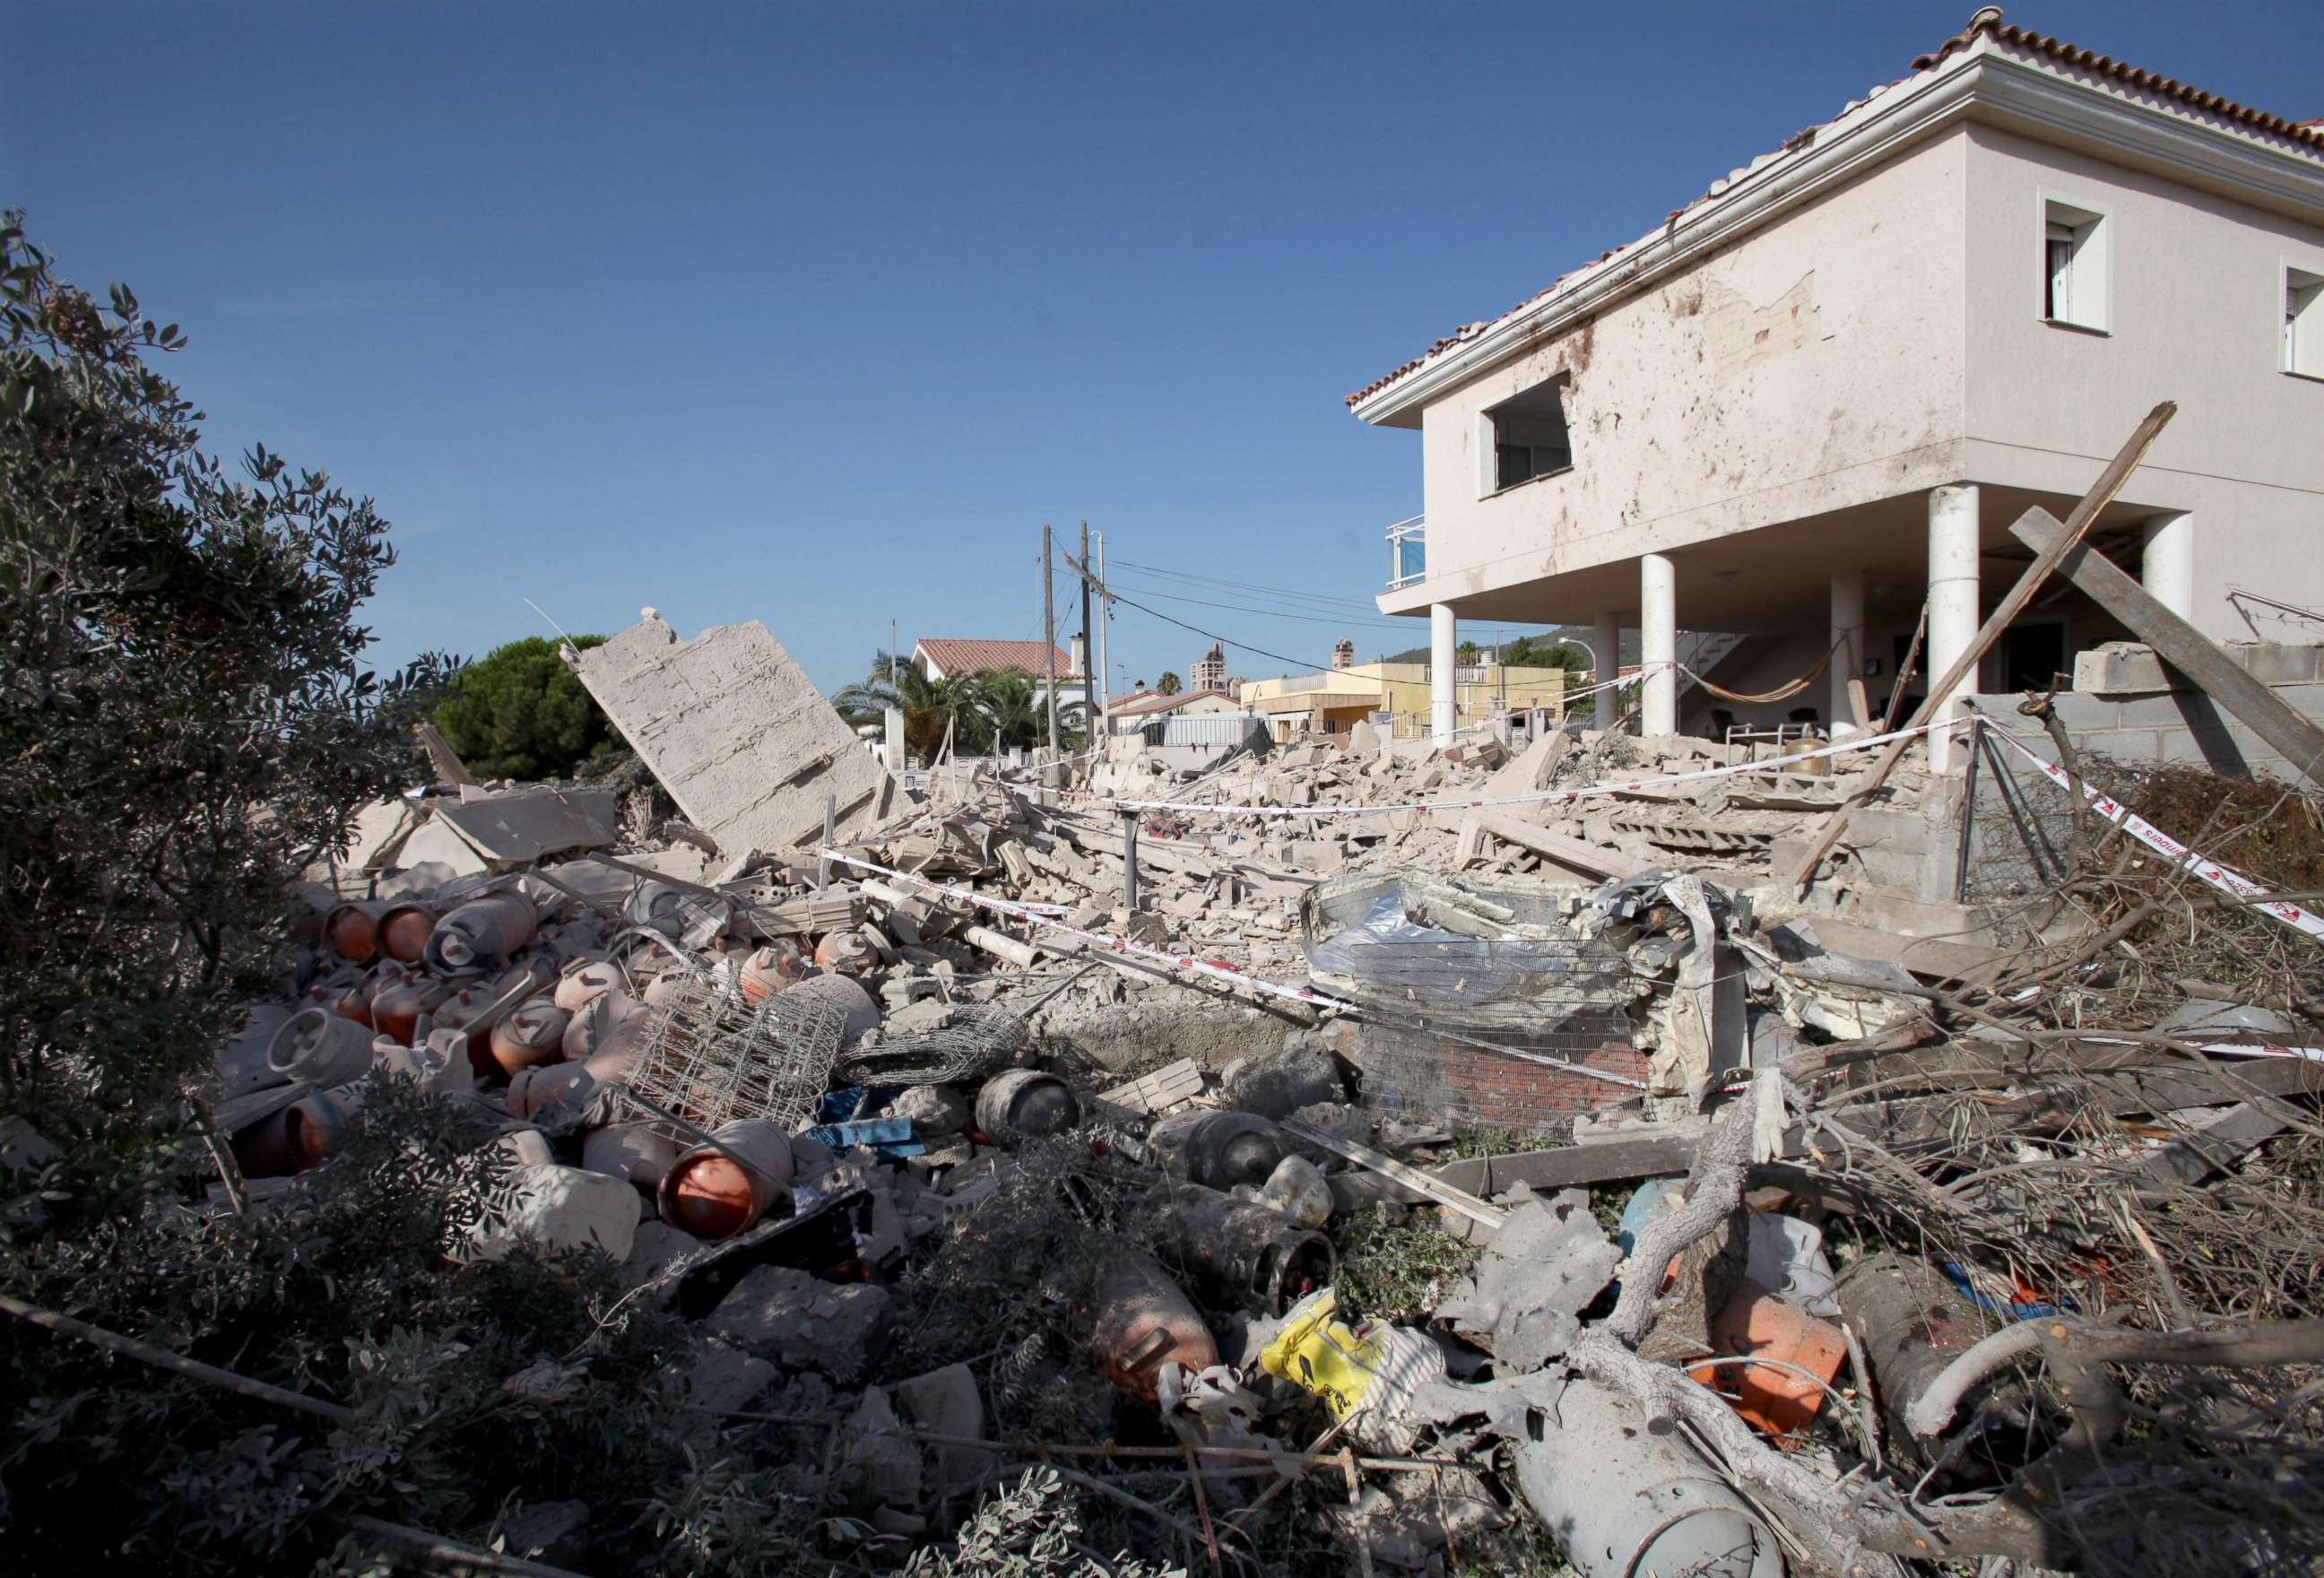 PHOTO: The debris of a house after it collapsed last night due to a gas leak explosion in the village of Alcanar, Catalonia, northeastern Spain, Aug. 17, 2017. Catalonian Police believe the explosion was connected to the attack in Barcelona.